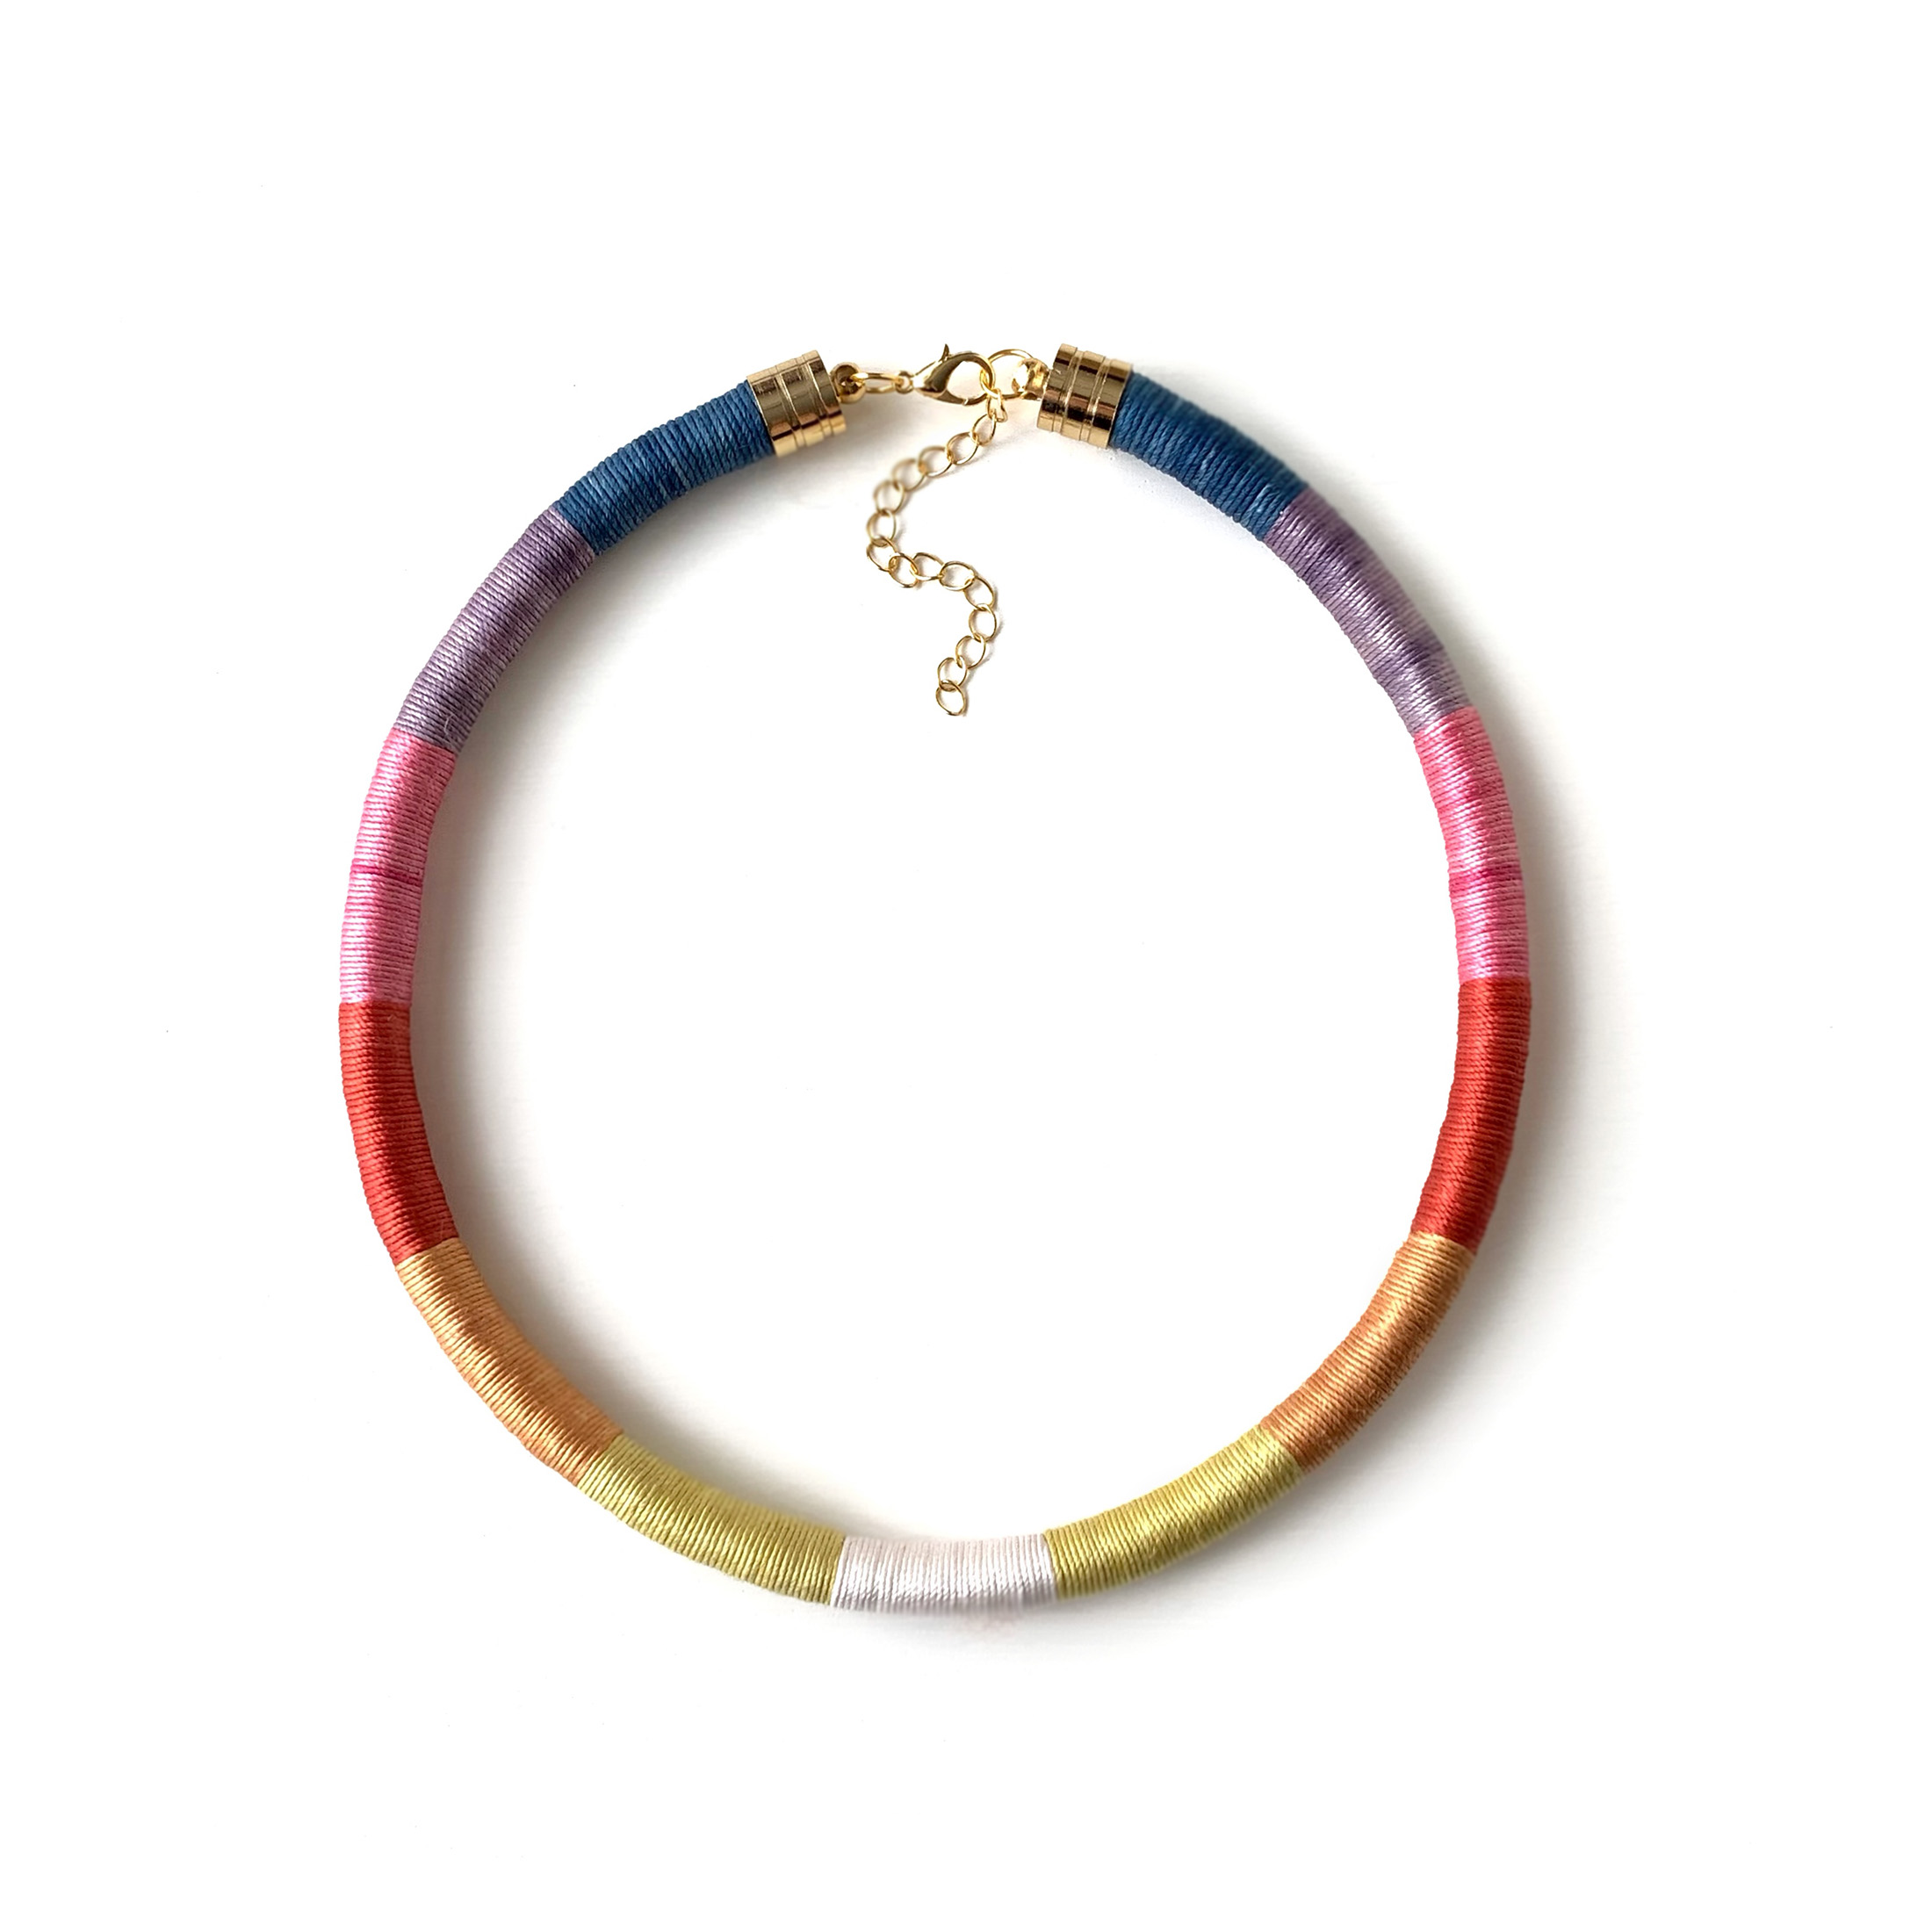 NATURE OF THE THINGS RAINBOW BOW CHOKER